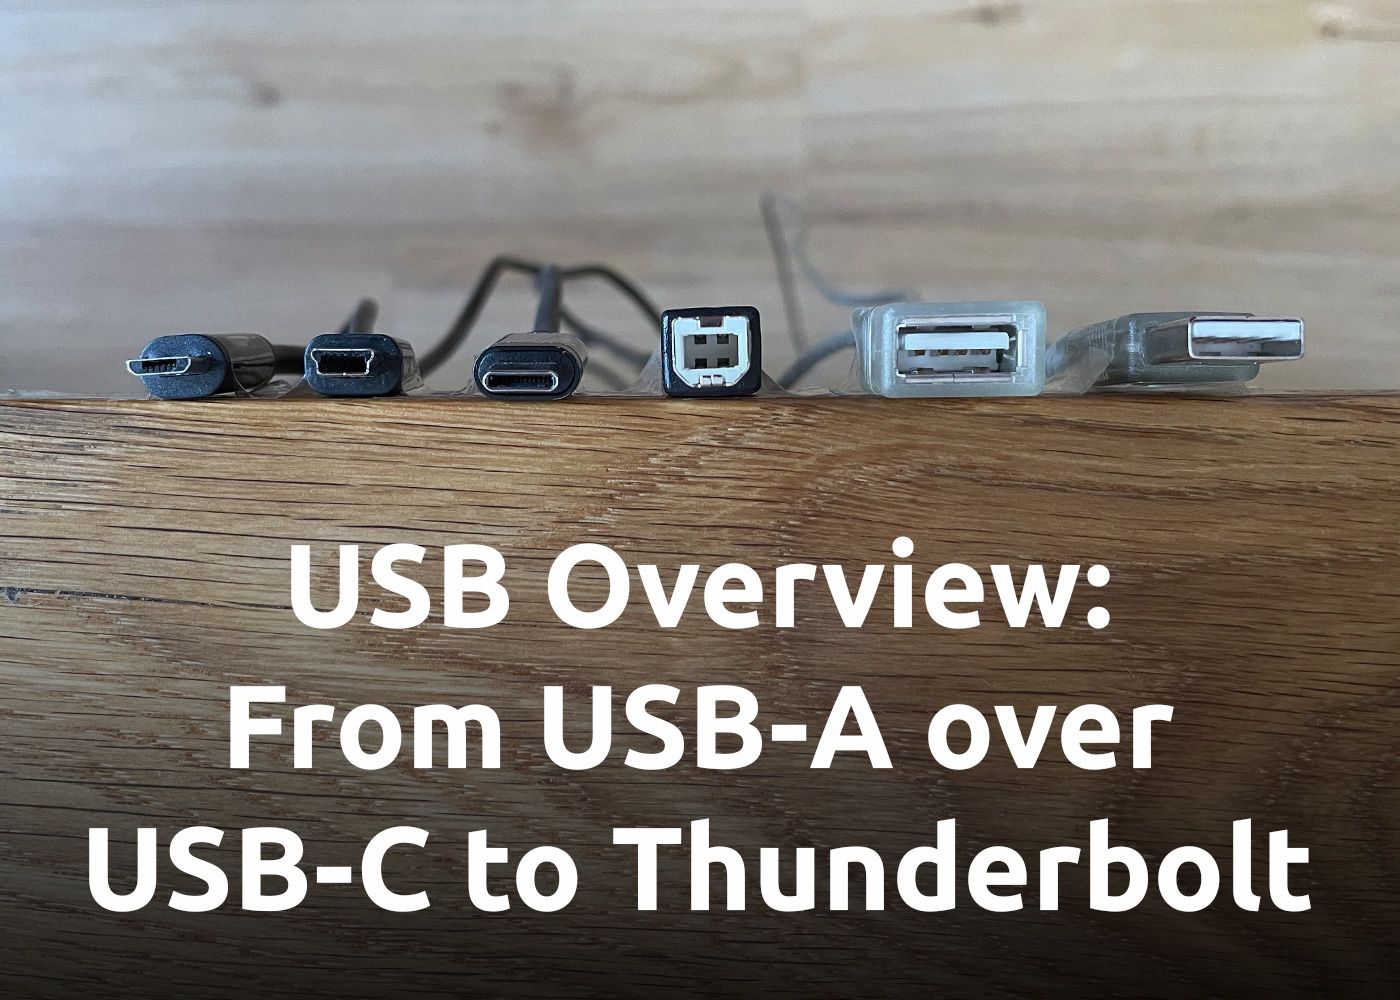 USB Overview: Differences between Ports, Colors, Standards, and Speed (USB-A, USB-C, USB 2.0/3.0/3.1/3.2, Thunderbolt 3/4/5, ...)